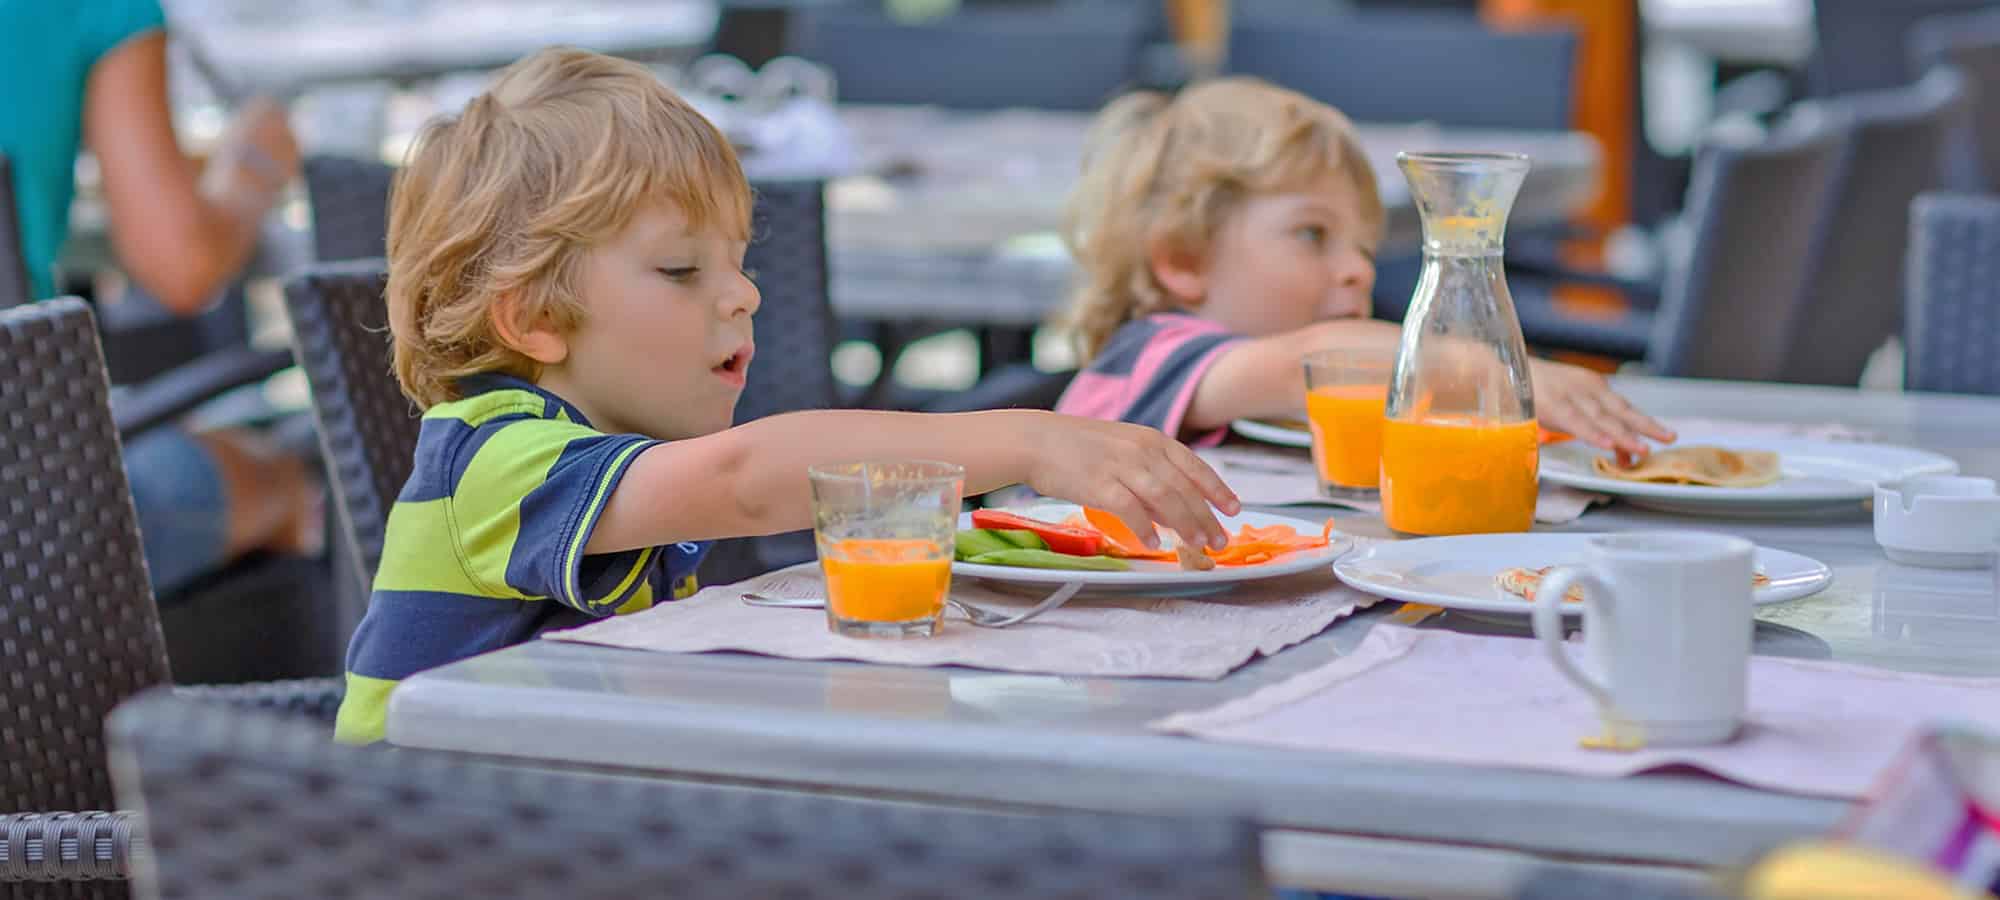 9 Kid Friendly Restaurants in Cairns You Need to Try